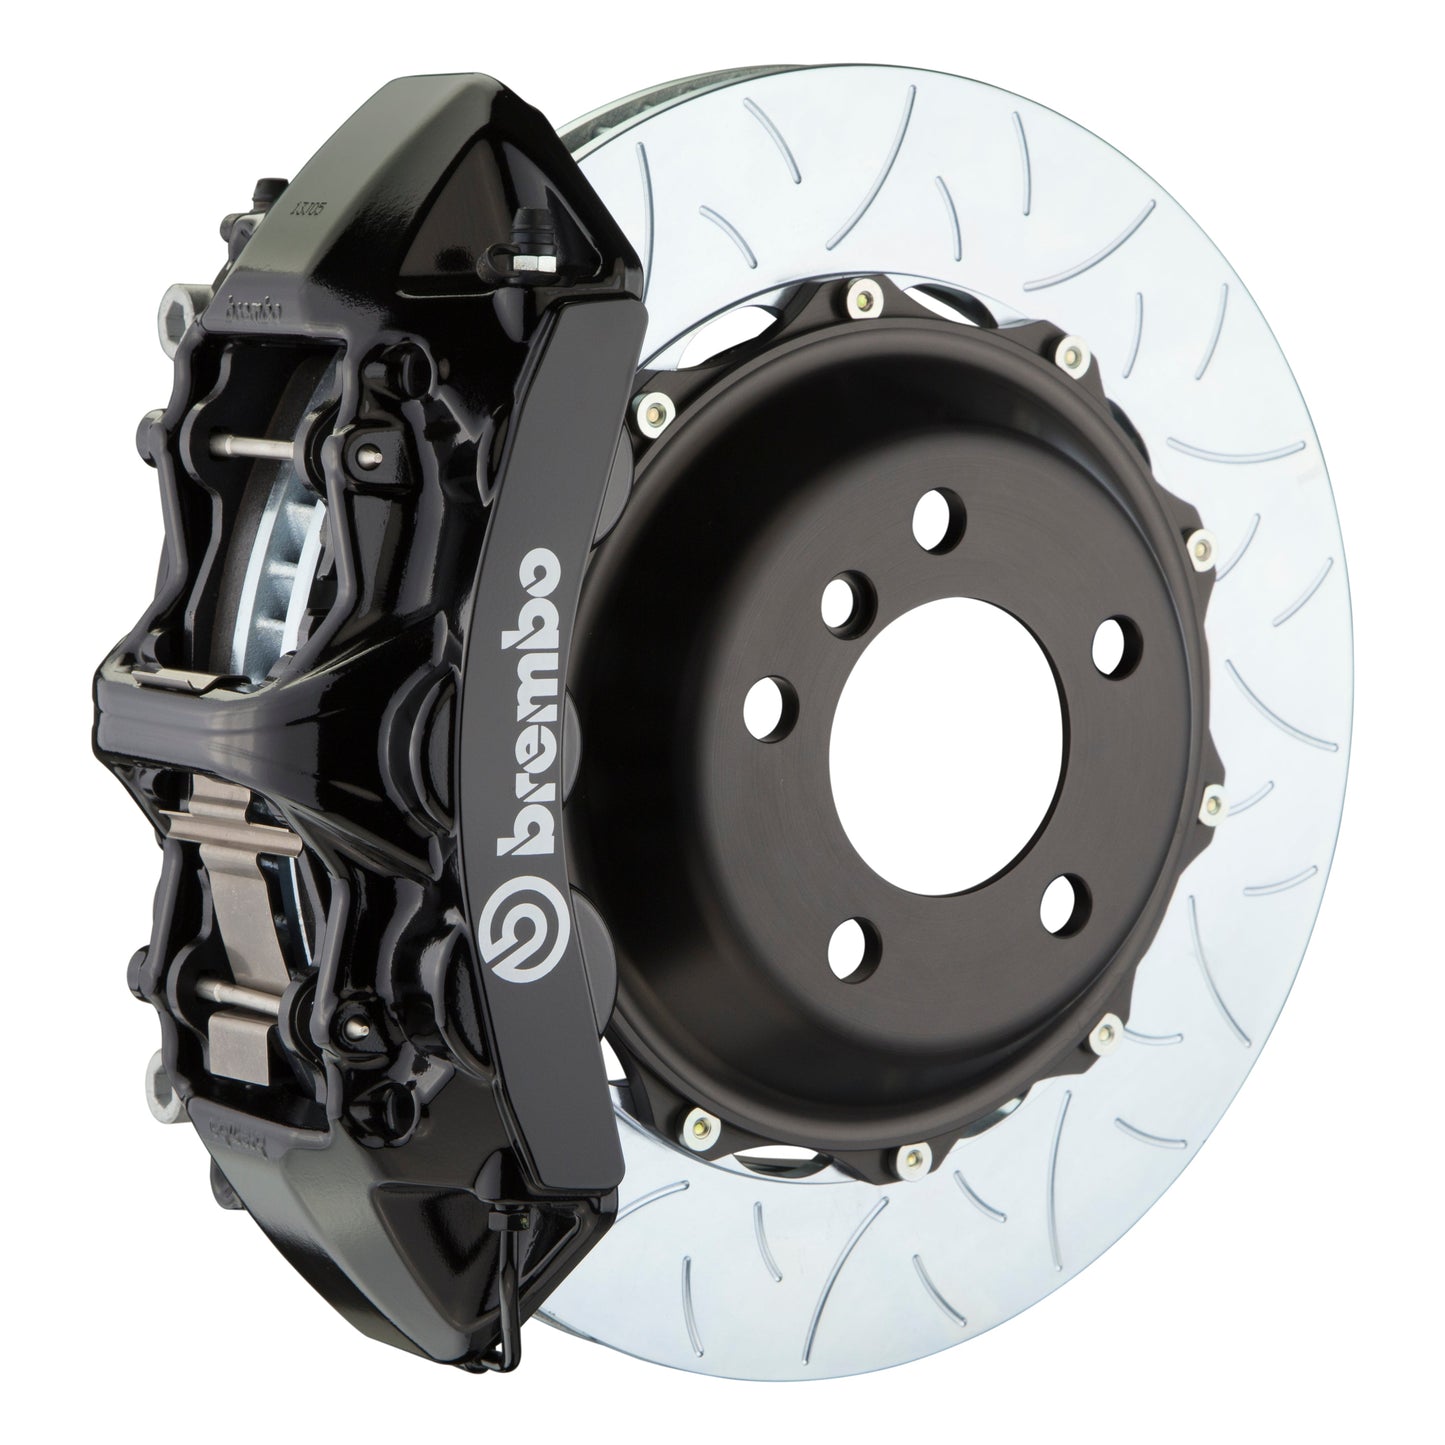 Front Brembo Gran Turismo Braking Upgrade Kit (1M19015A) GT / M6 Caliper with 6-Pistons & 2-piece 380x32 Disc